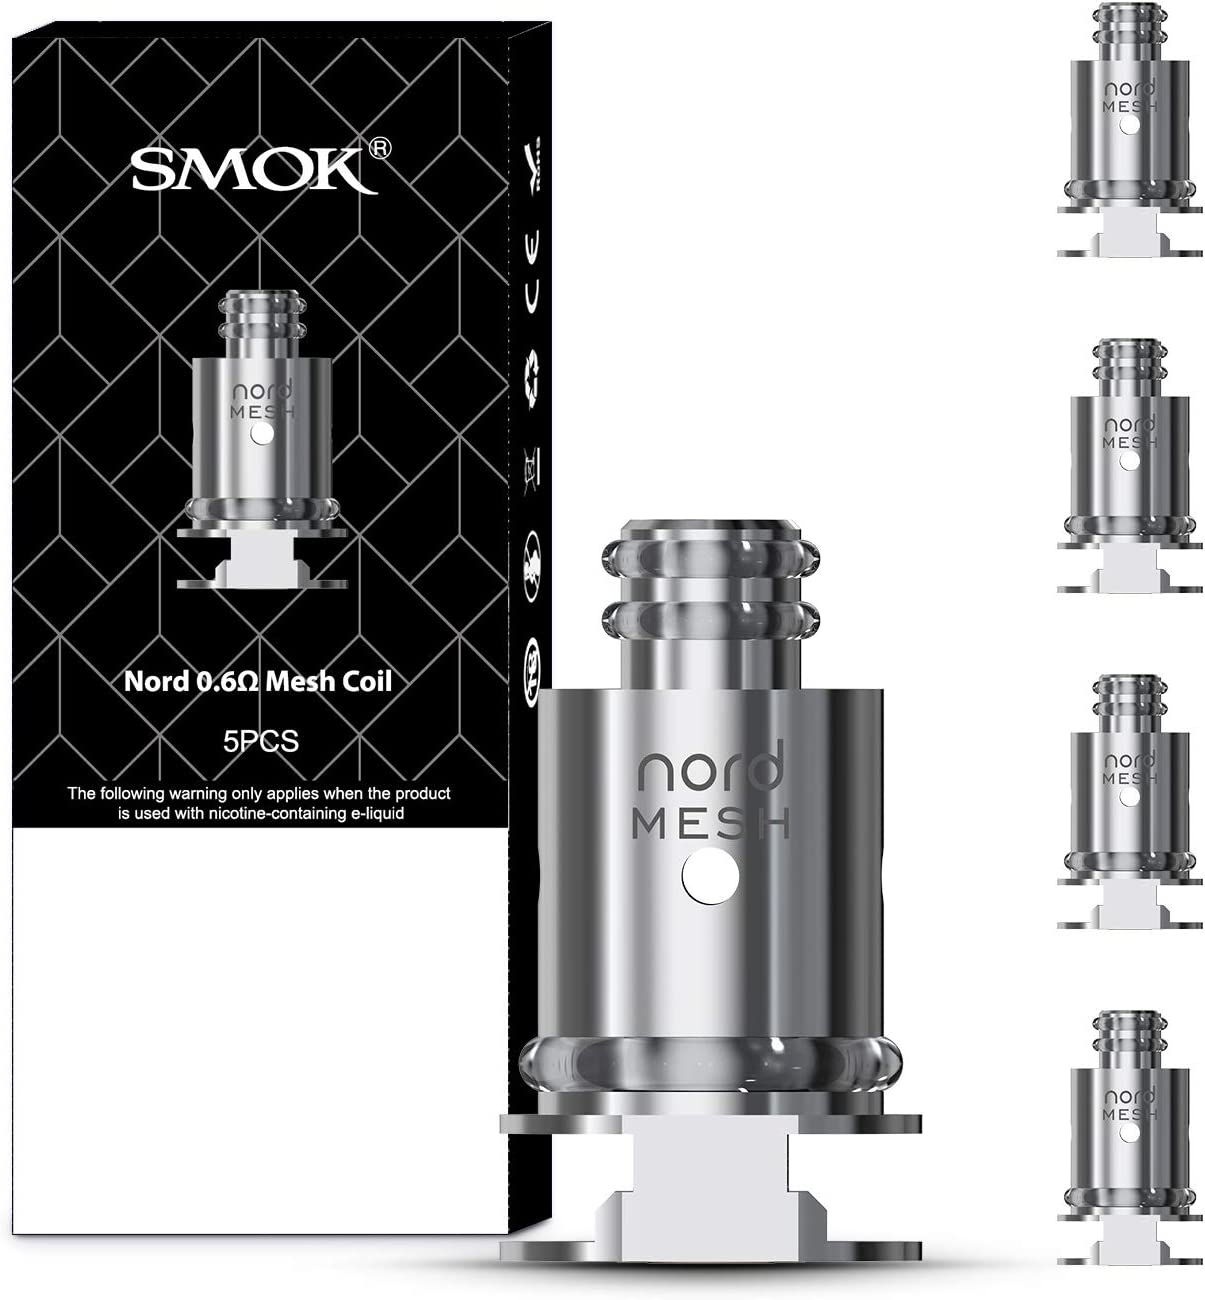 Smok Nord Coils (5 pack) - Explore a wide range of e-liquids, vape kits, accessories, and coils for vapers of all levels - Vape Saloon